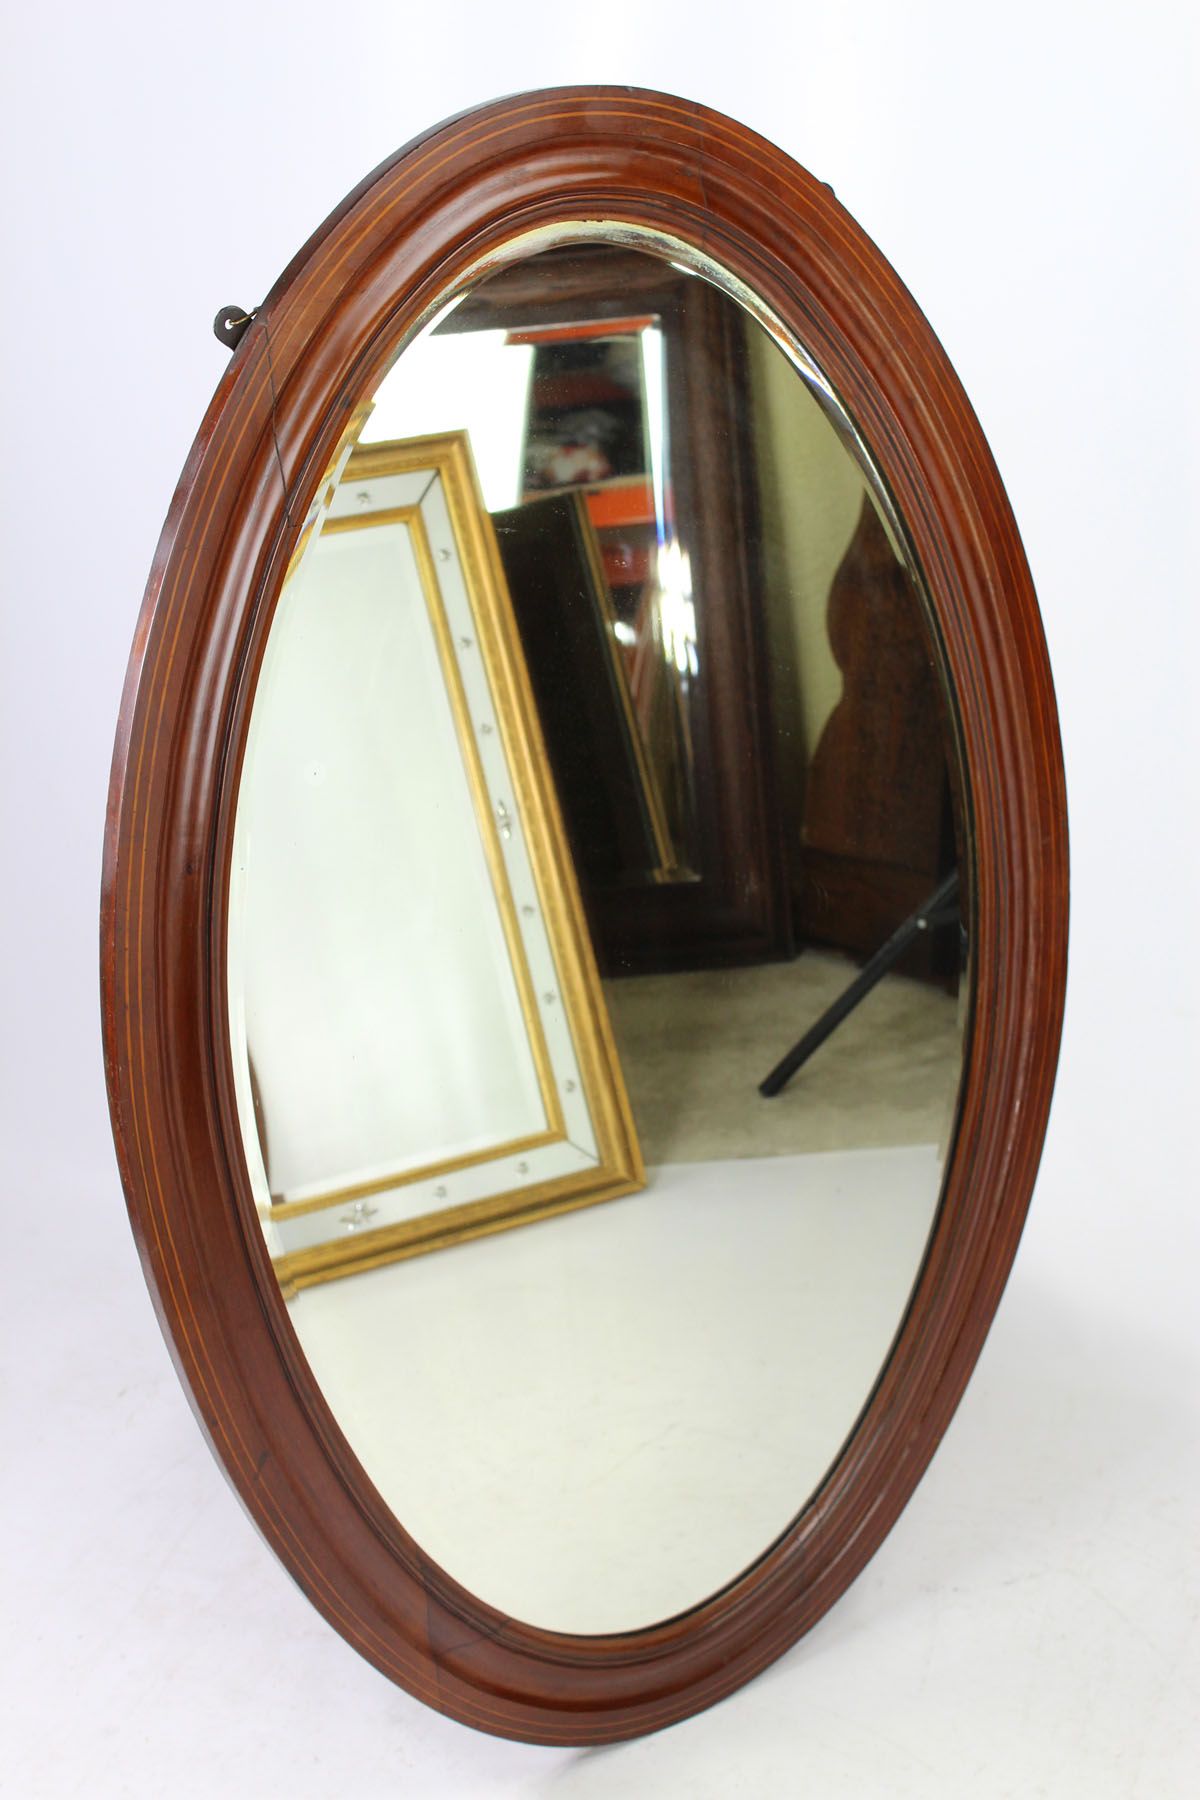 Large Edwardian Inlaid Mahogany Oval Mirror Pertaining To Most Recent Mahogany Accent Wall Mirrors (View 14 of 15)